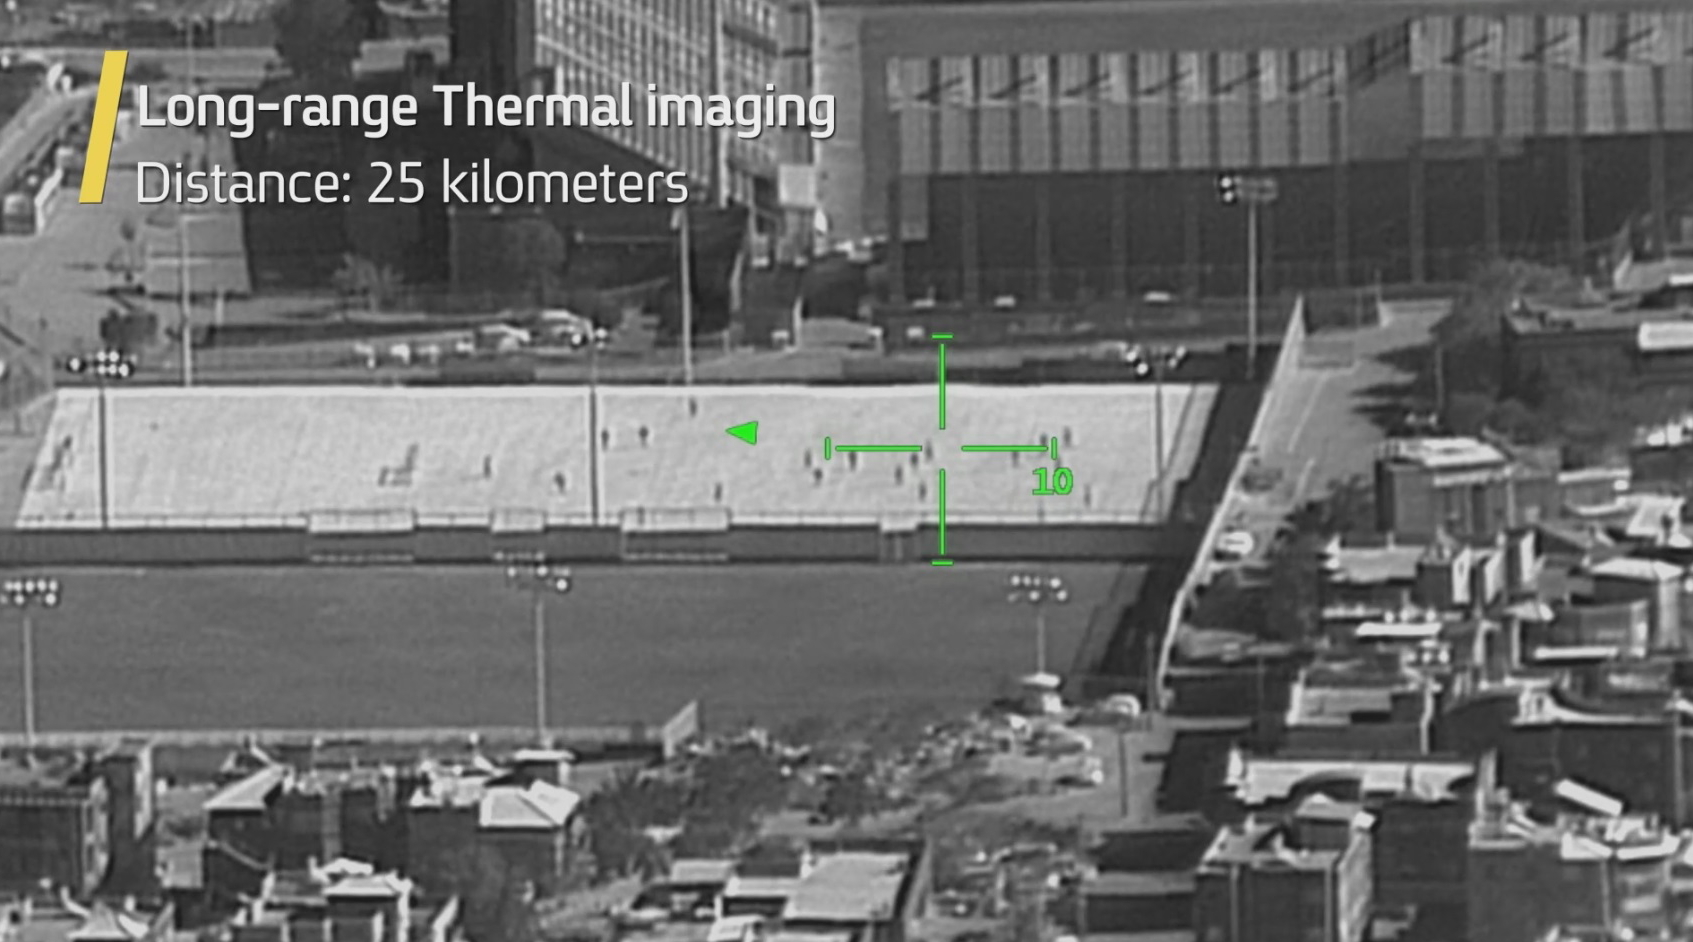 In recent flight tests that were conducted in Israel, the new system was able to produce high resolution imagery of a football game in MWIR channel from a distance of 25km. Click to enlarge.